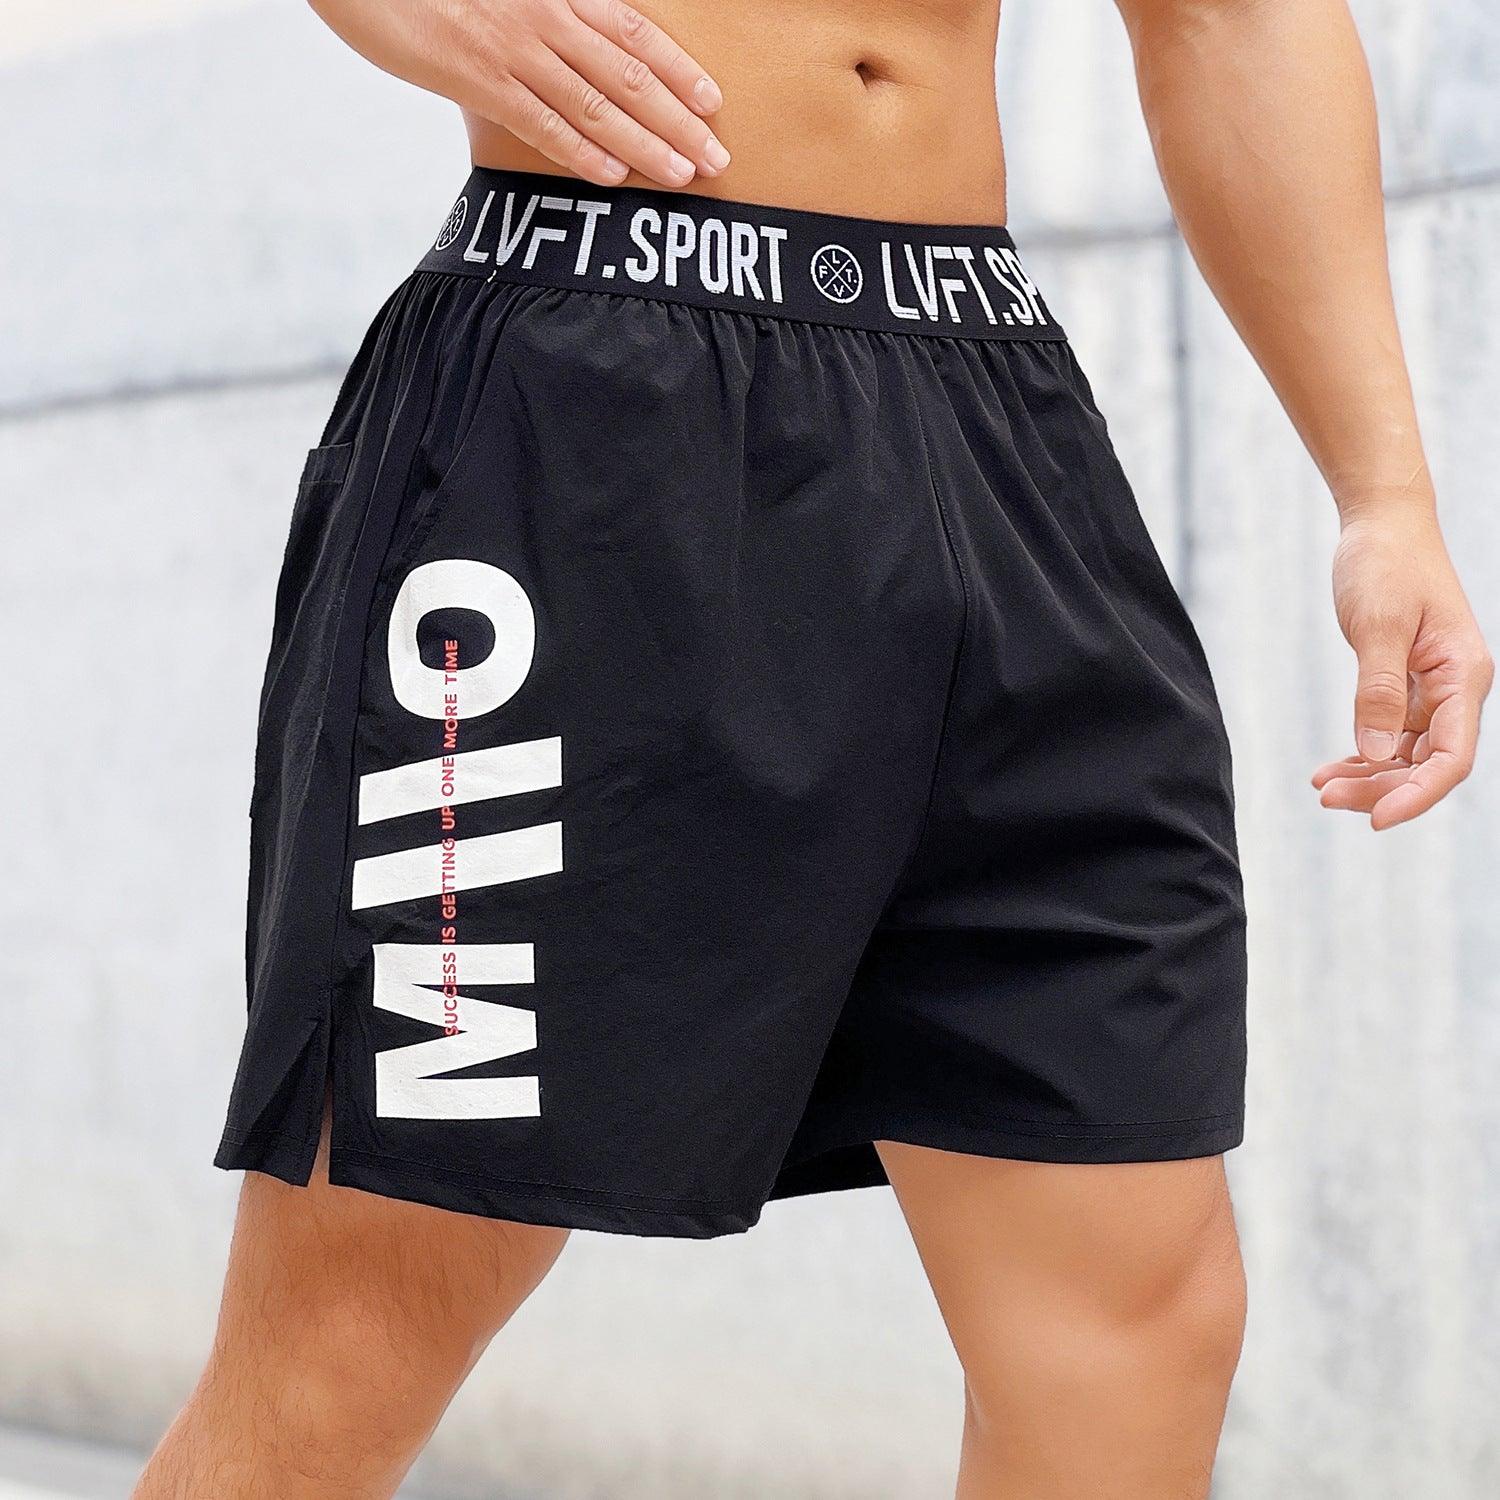 American Summer Workout Men's Shorts Sports Basketball Outdoor Exercise Loose Breathable Quick-drying Thin Elastic Pants - Nioor